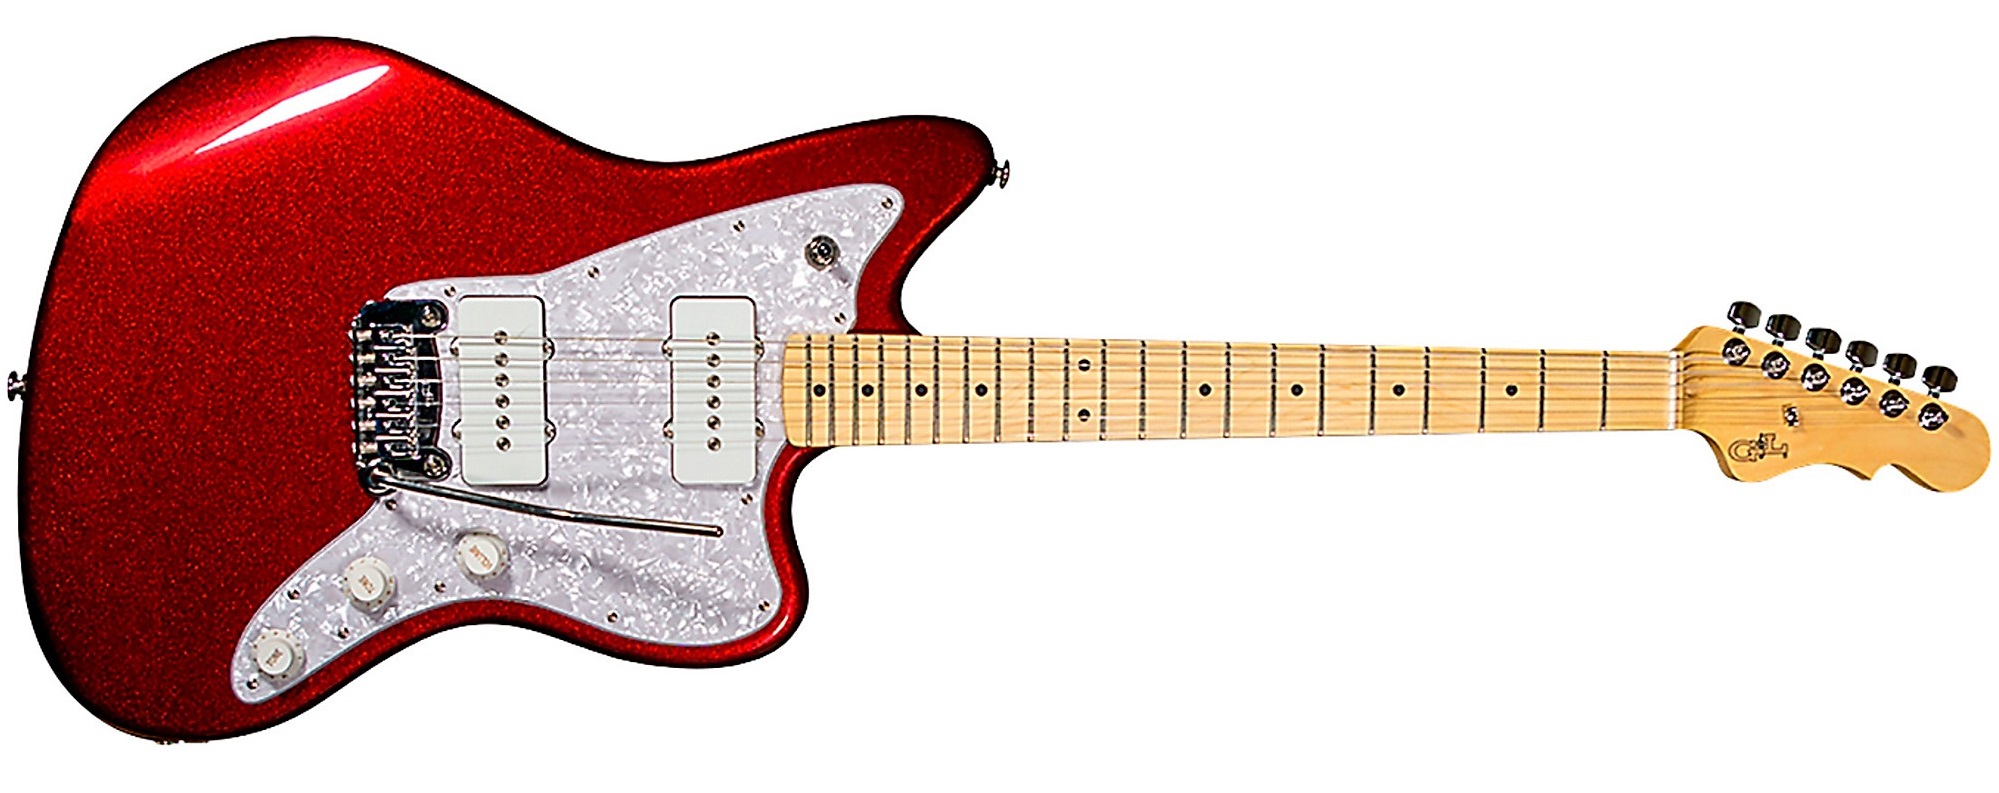 G&L Fullerton Deluxe Doheny Electric Guitar on a white background